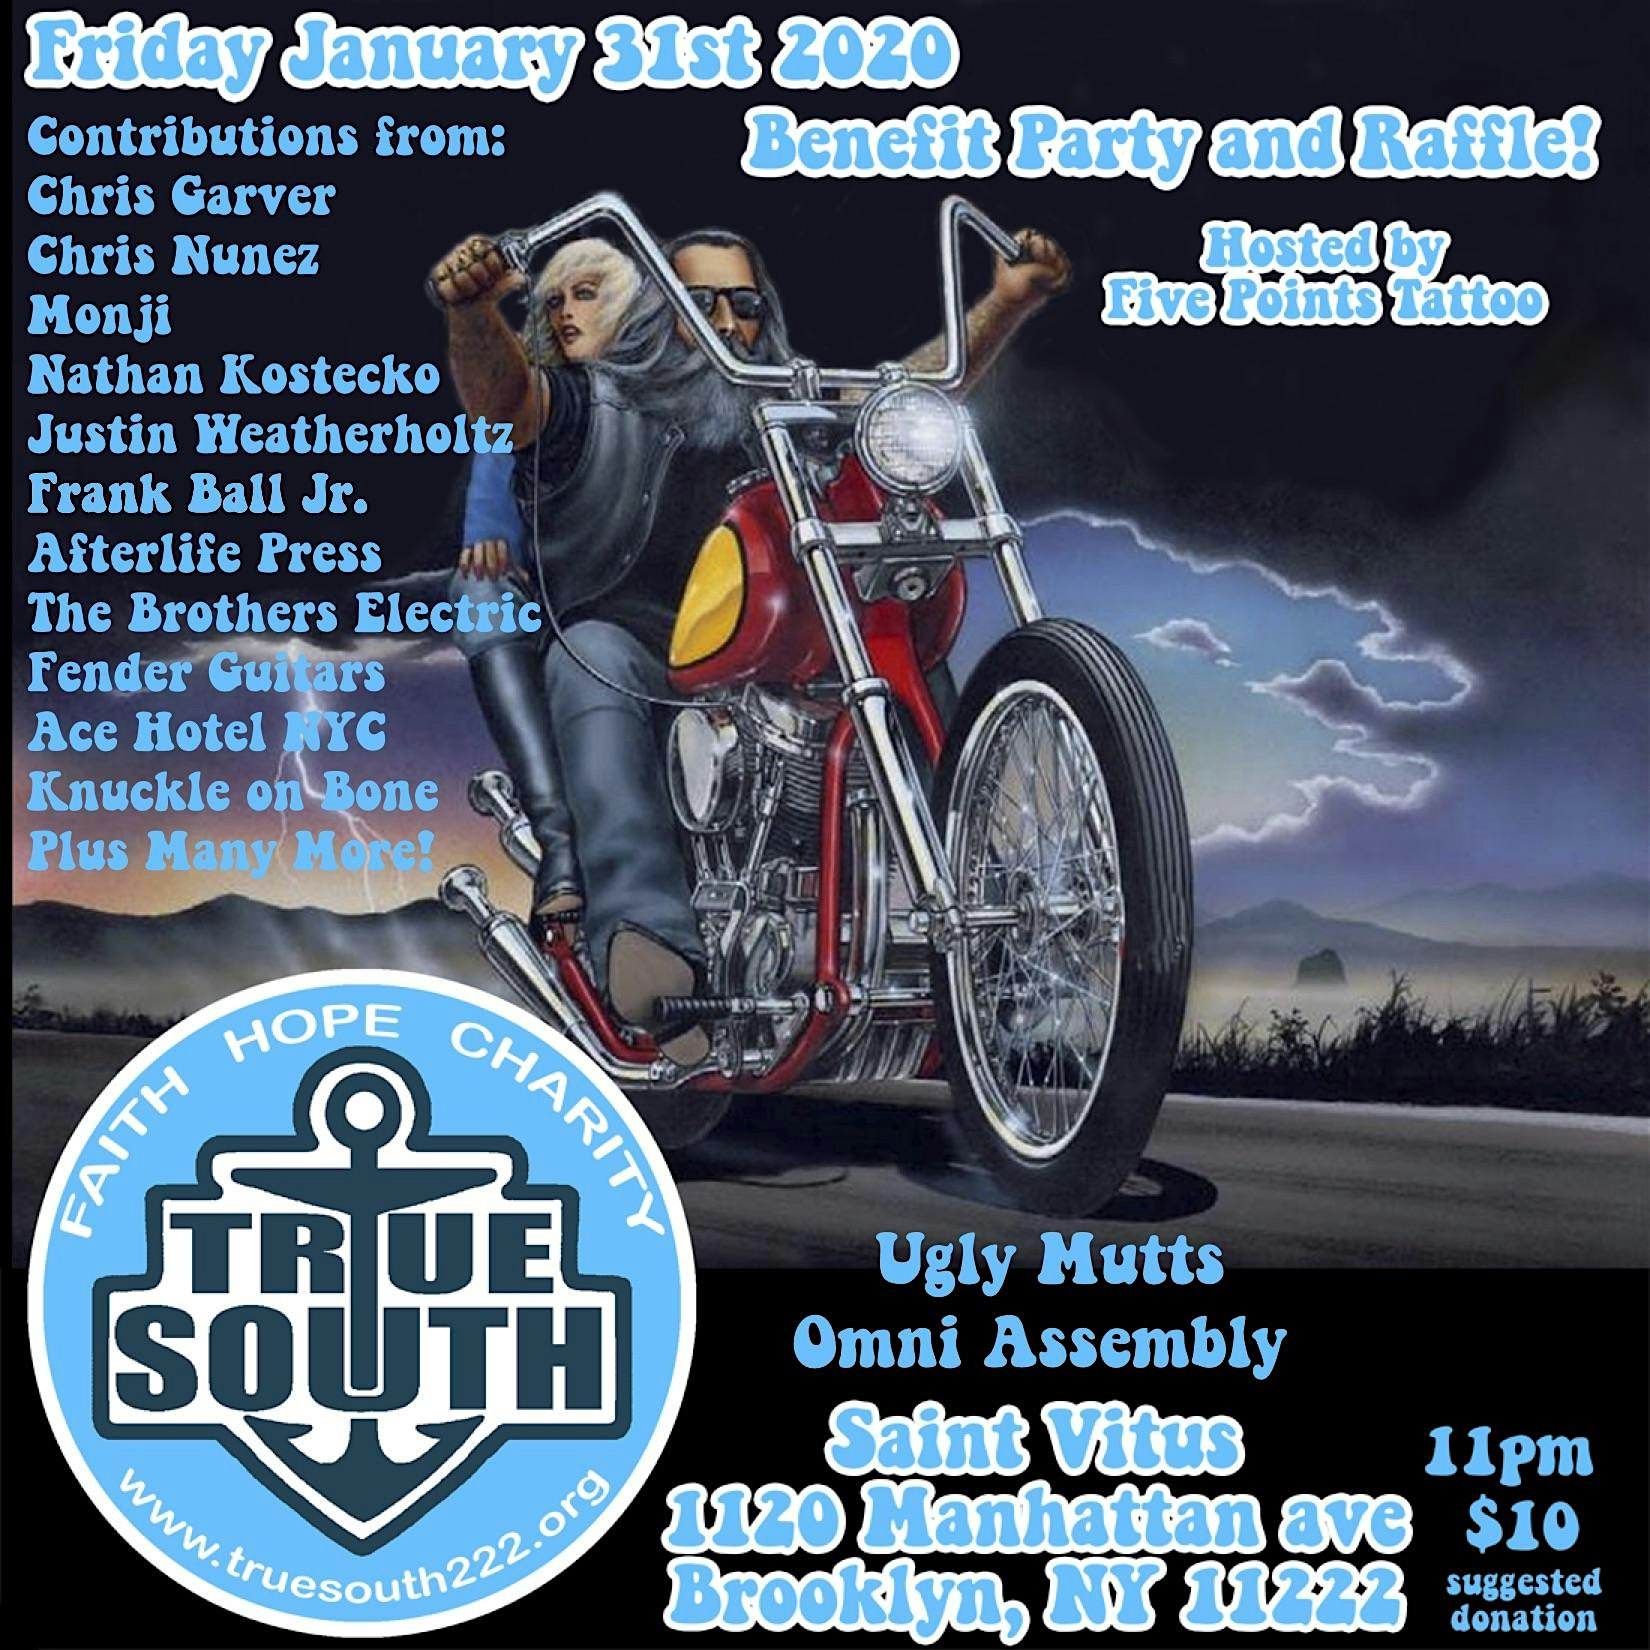 True South Benefit Party with Ugly Mutts and Omni Assembly